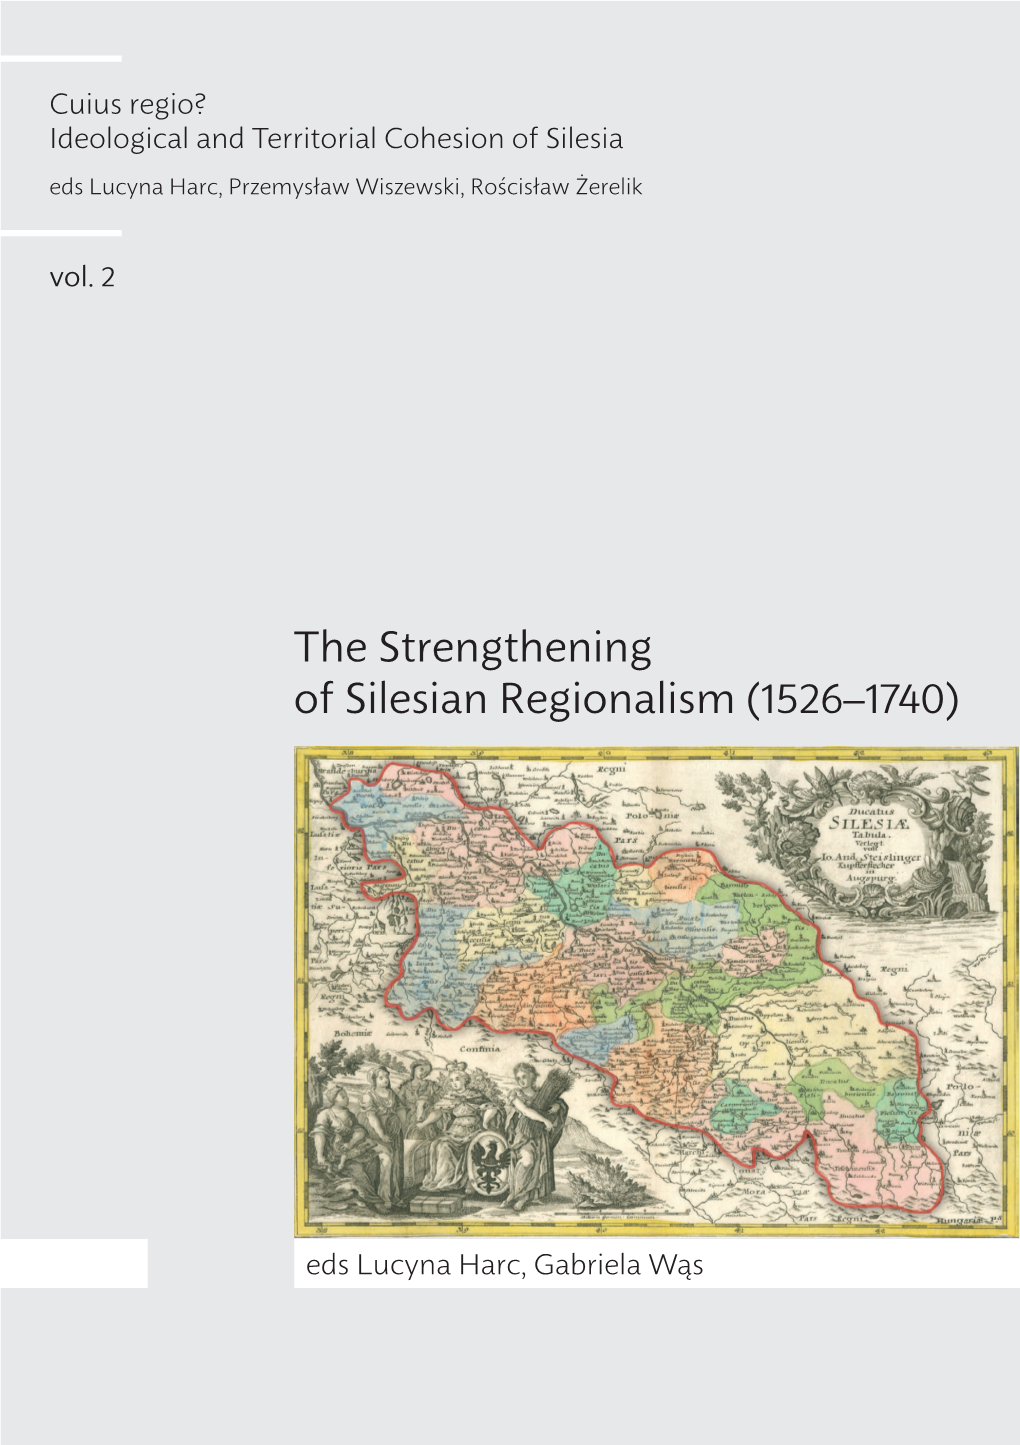 Ideological and Territorial Cohesion of the Historical Region of Silesia (C